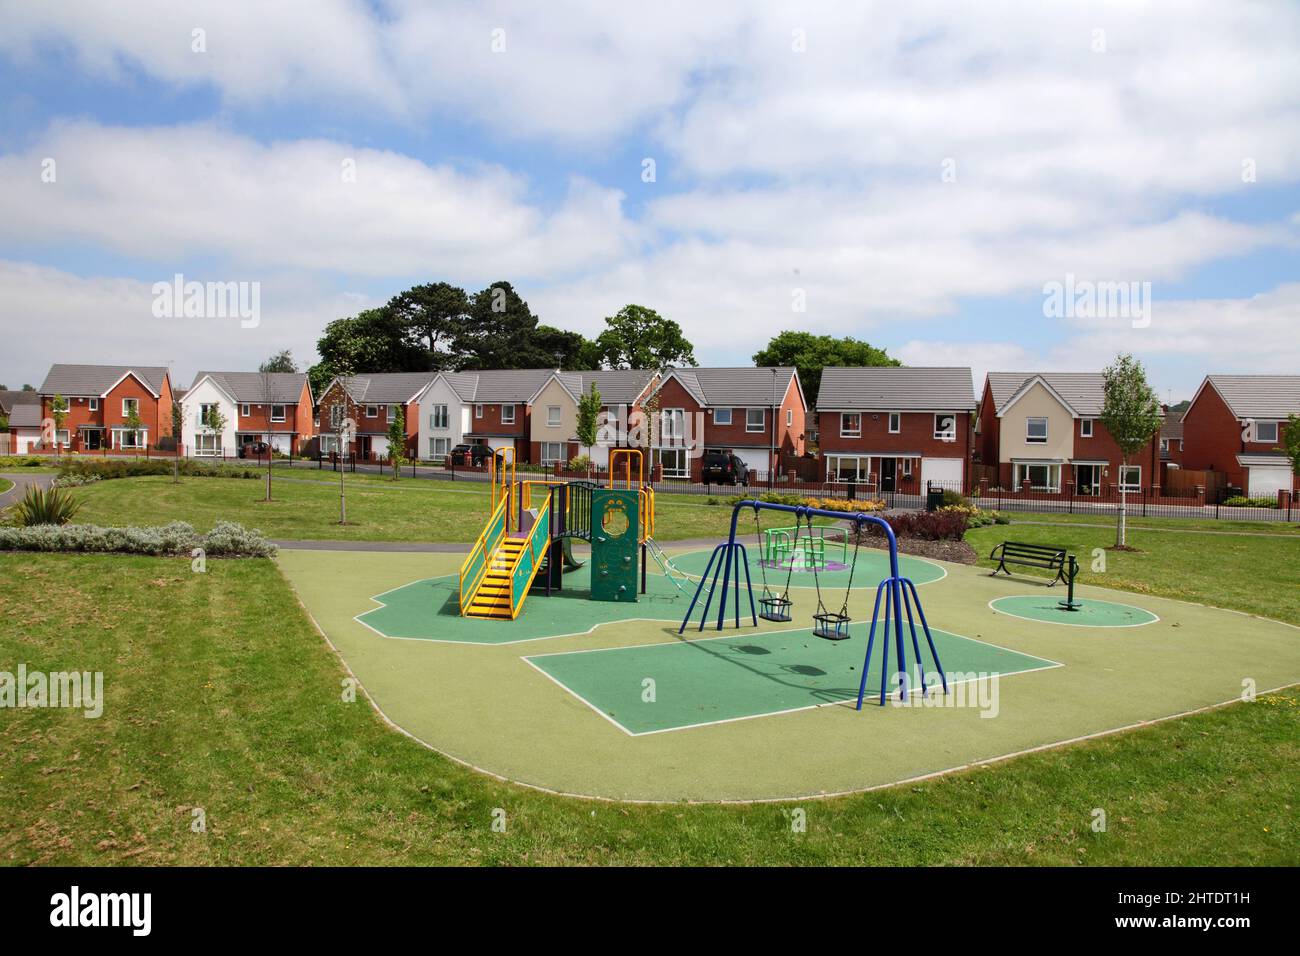 Green space and play area outside a modern housing estate development in Wolverhampton, West Midlands, UK, swings, slide,seats,climbing frame Stock Photo